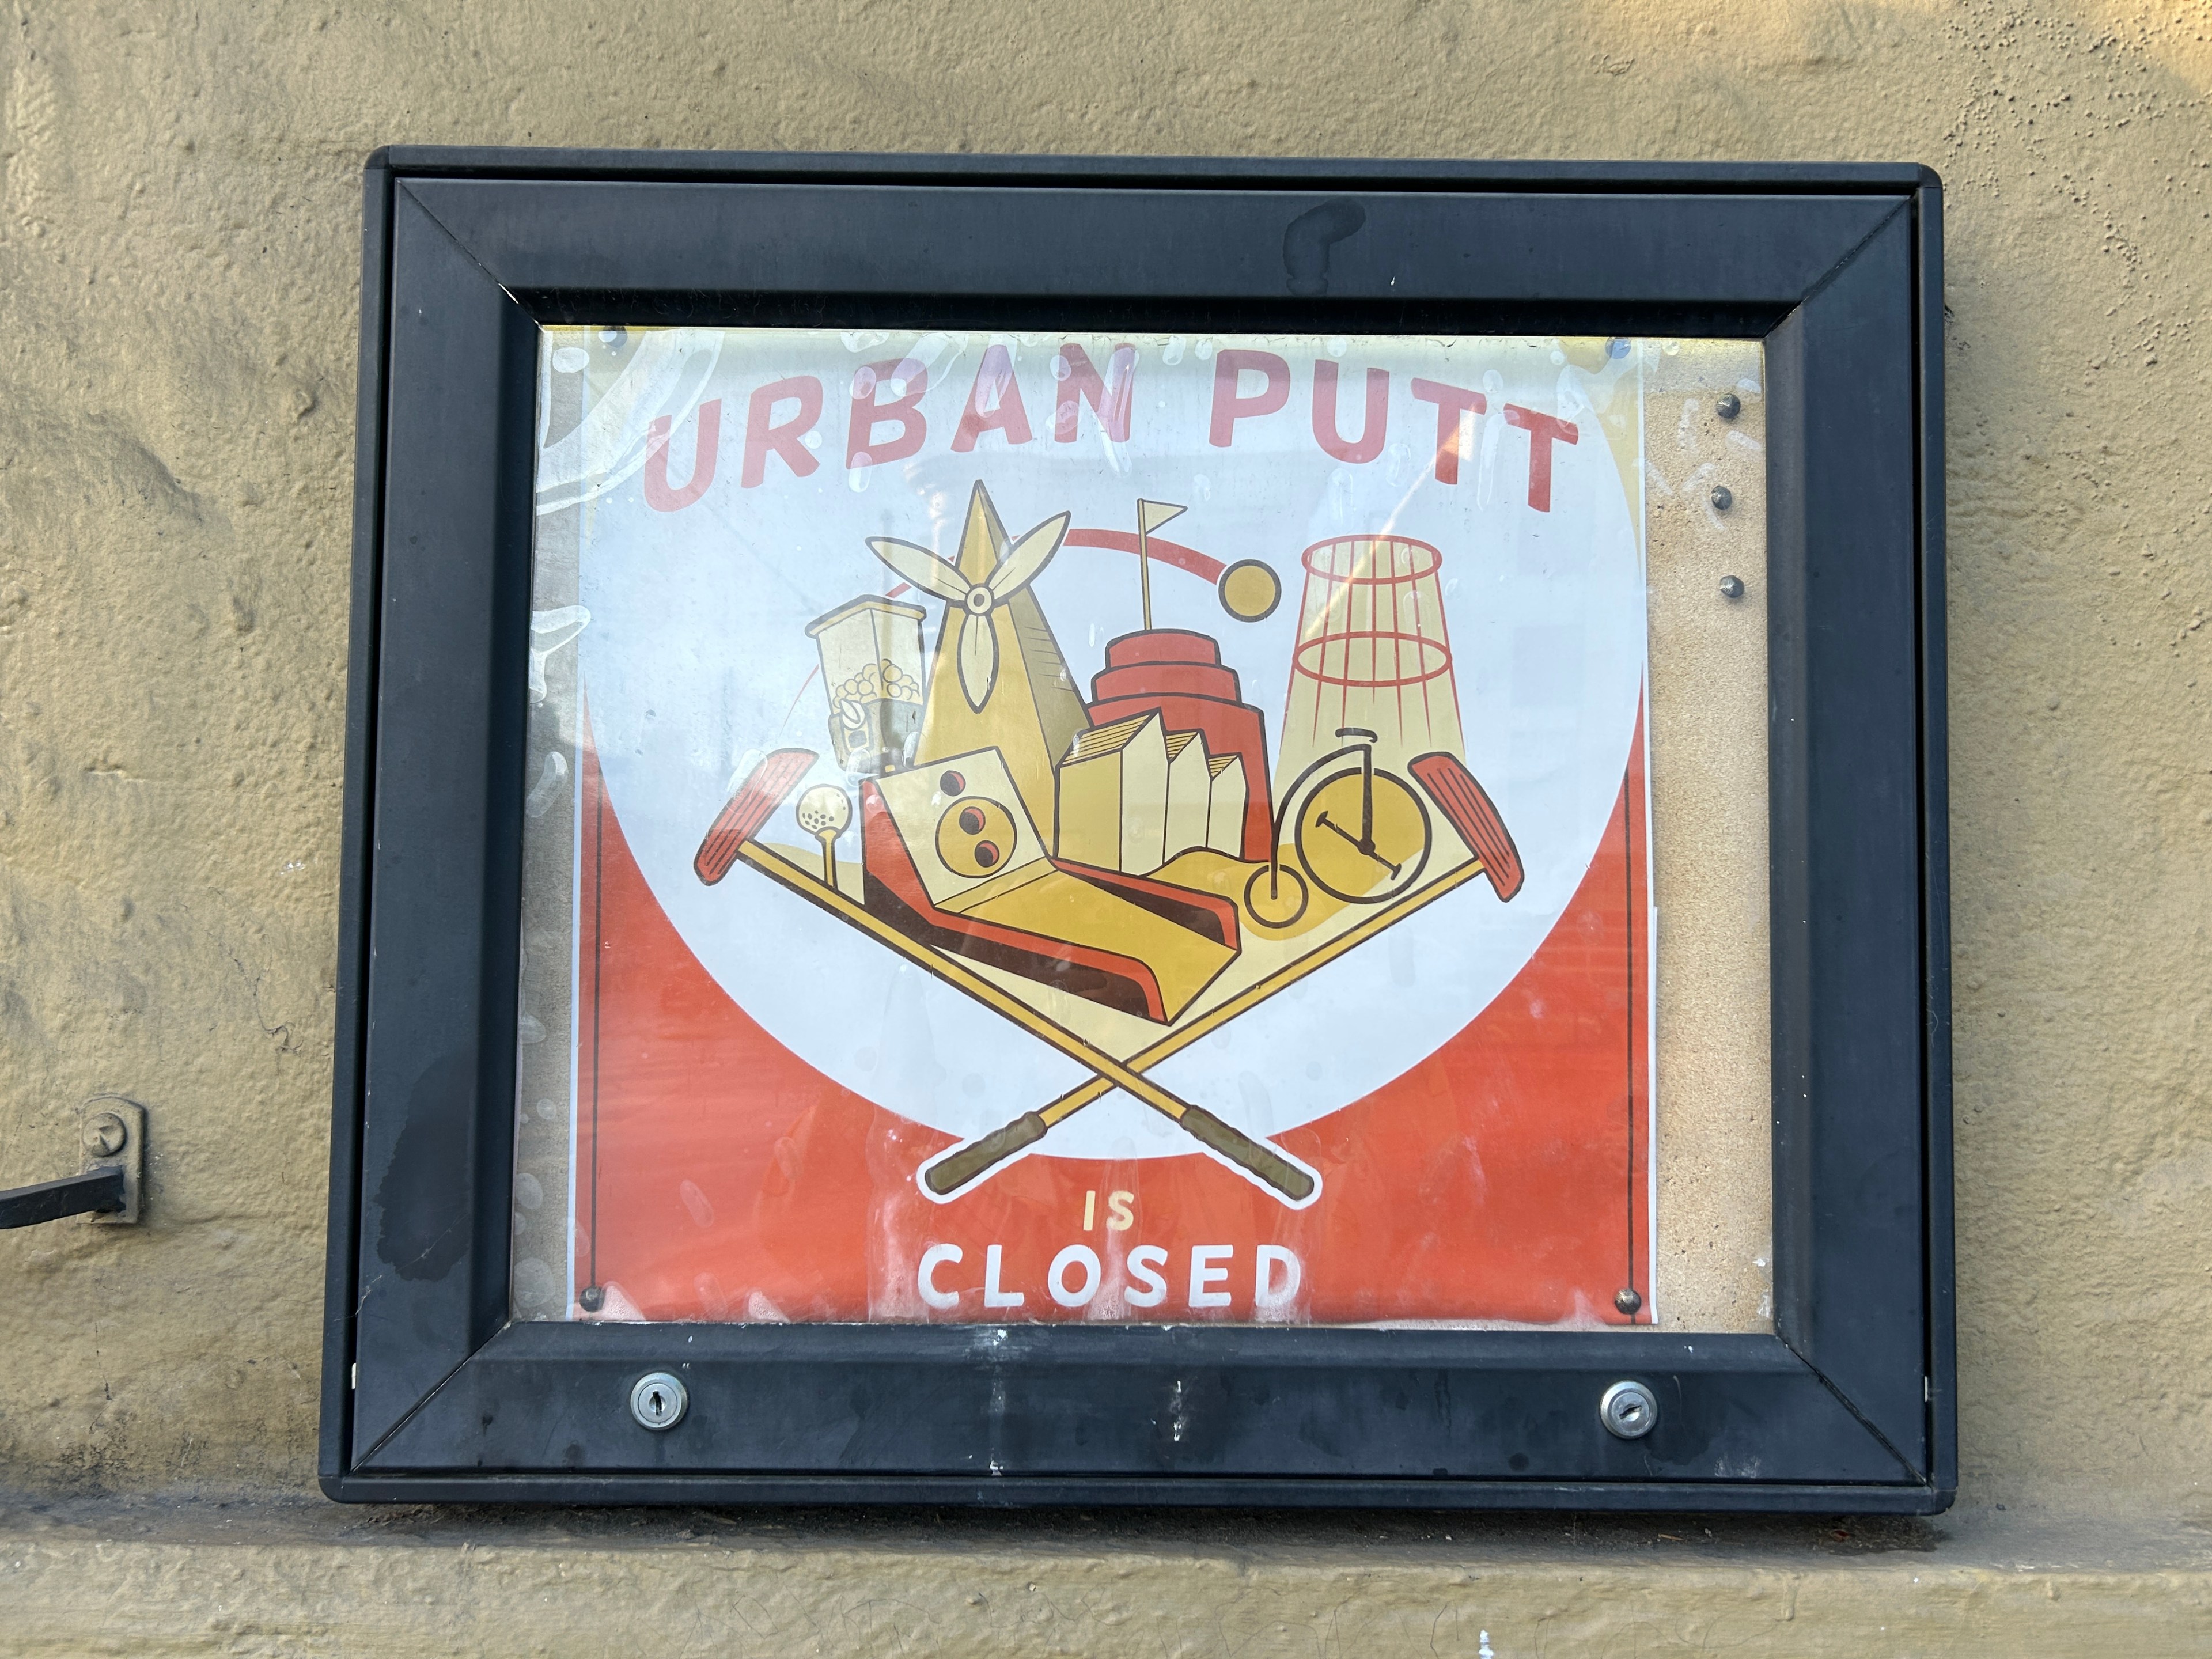 An exterior sign by day stating that an indoor mini golf course has closed.